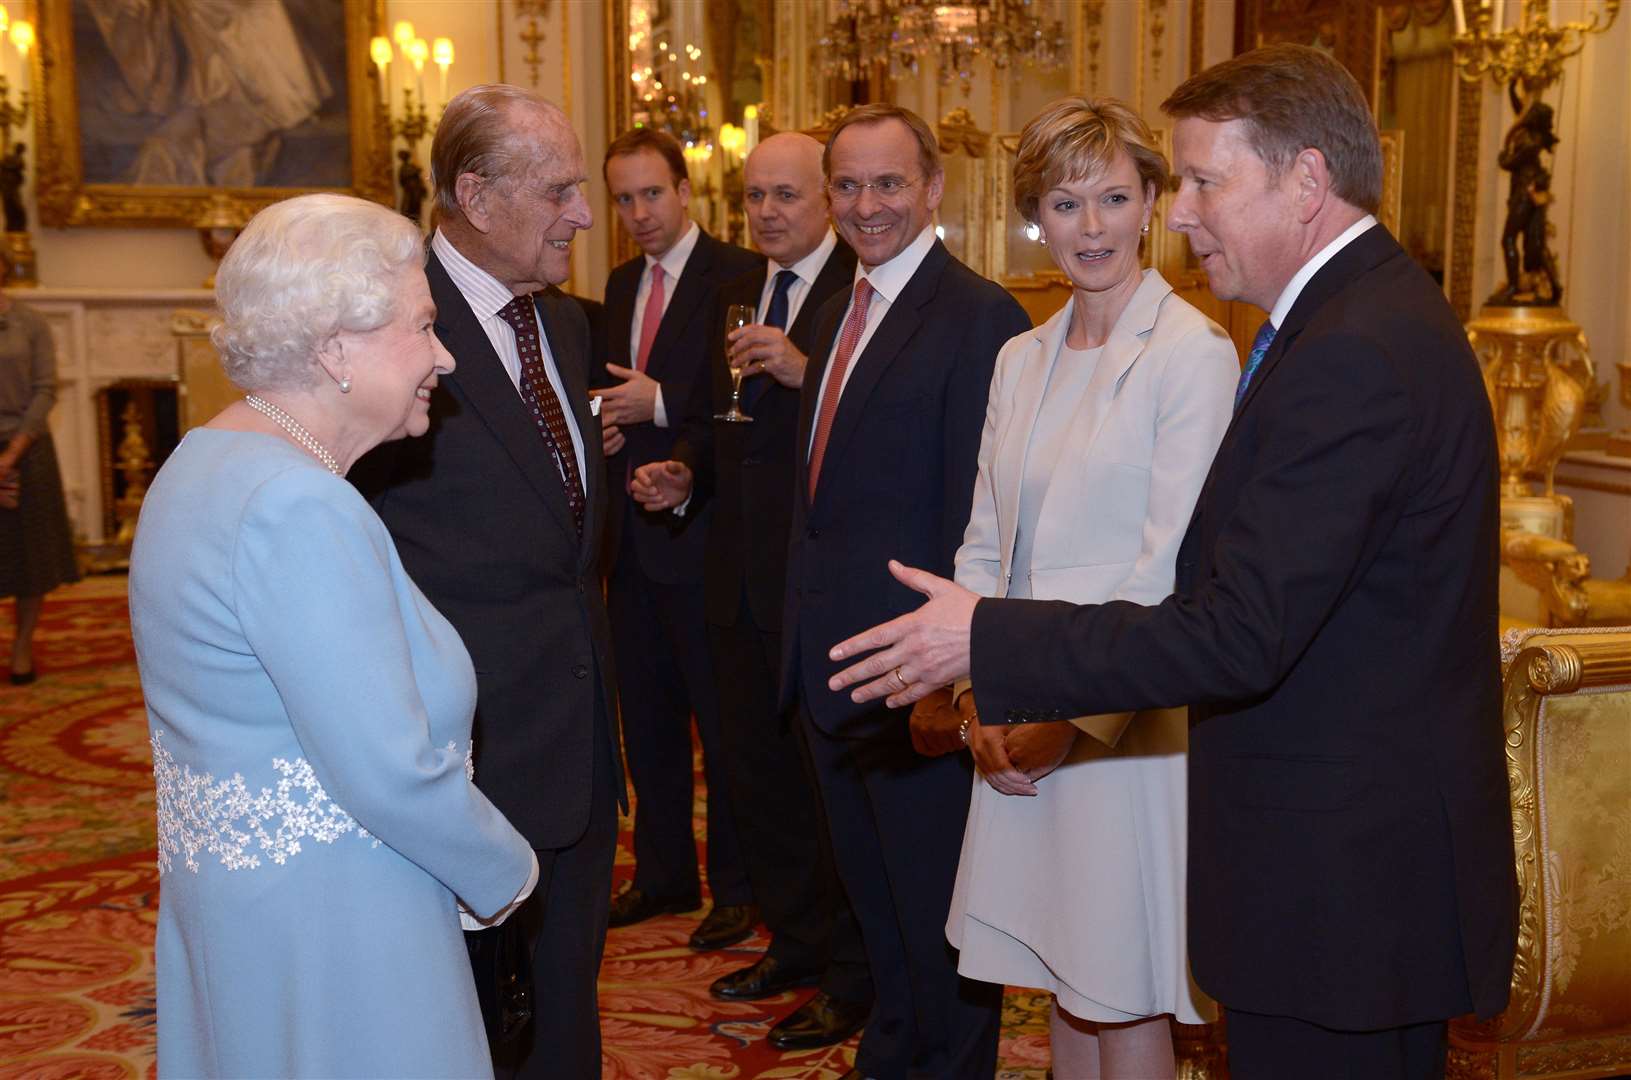 The Queen and the Duke of Edinburgh meeting Julie Etchingham and Bill Turnbull at Buckingham Palace in 2015 (Anthony Devlin/PA)